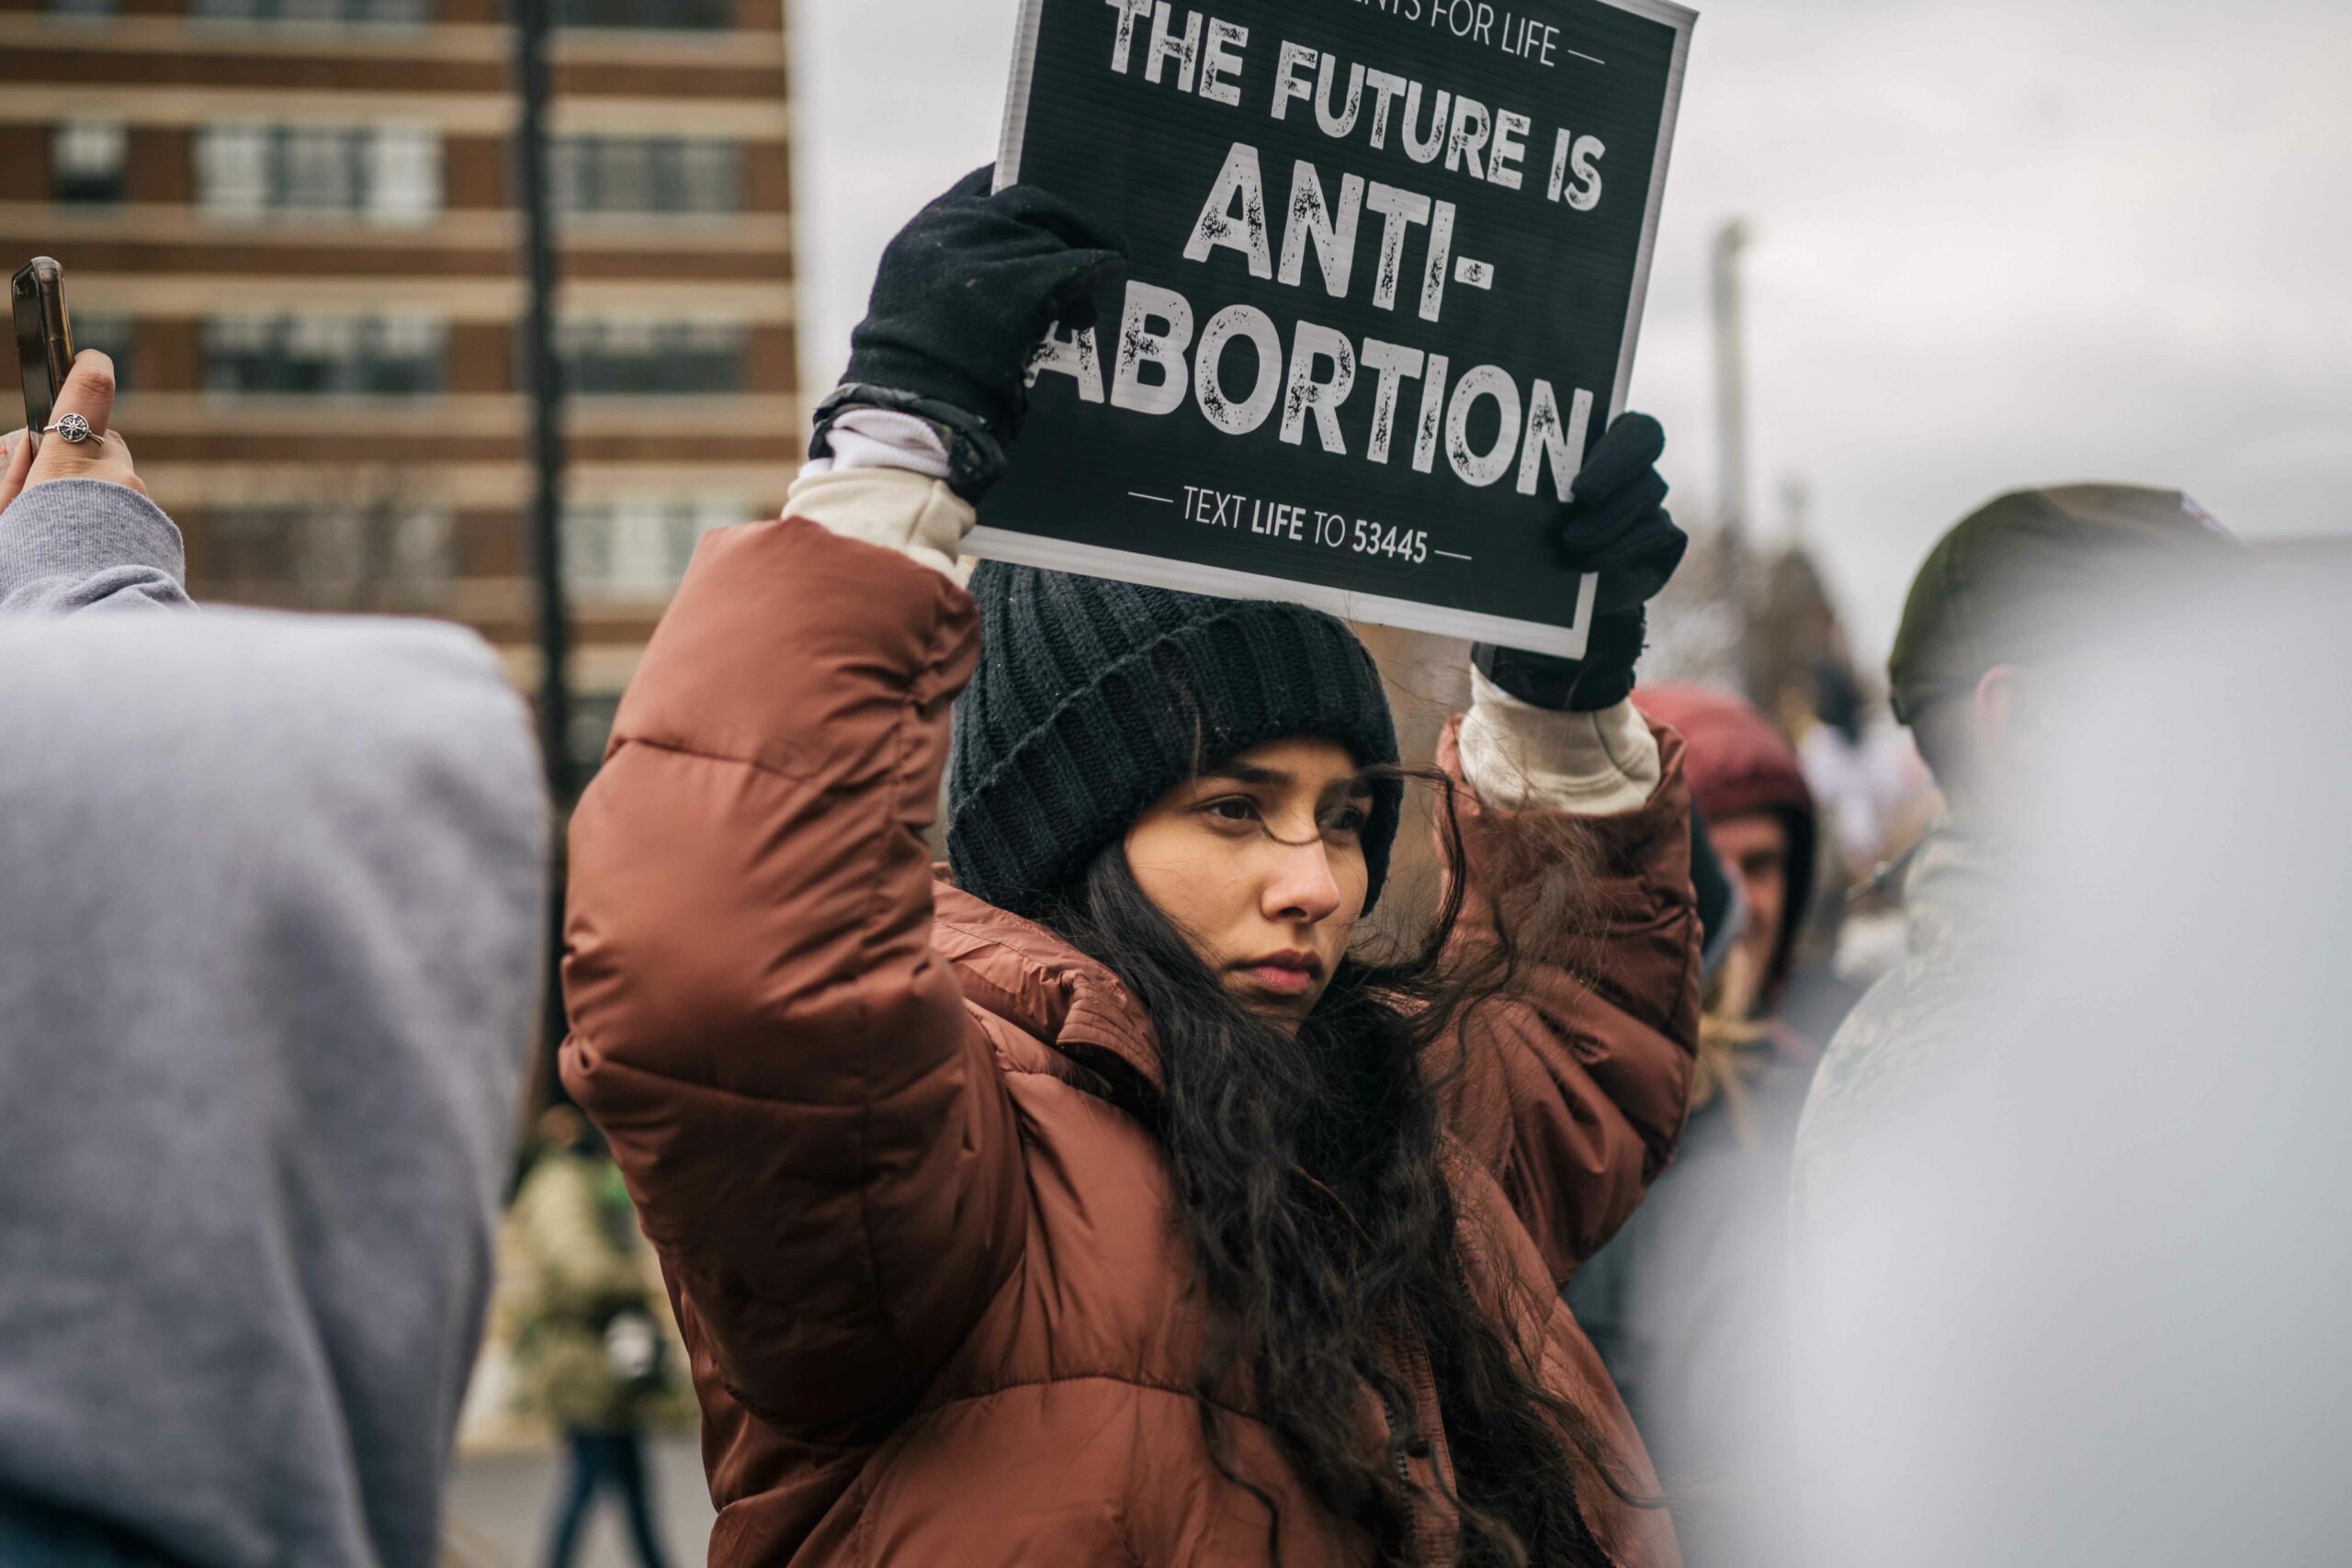 A woman holds a sign that reads "The Future is Anti-Abortion" during a rally.